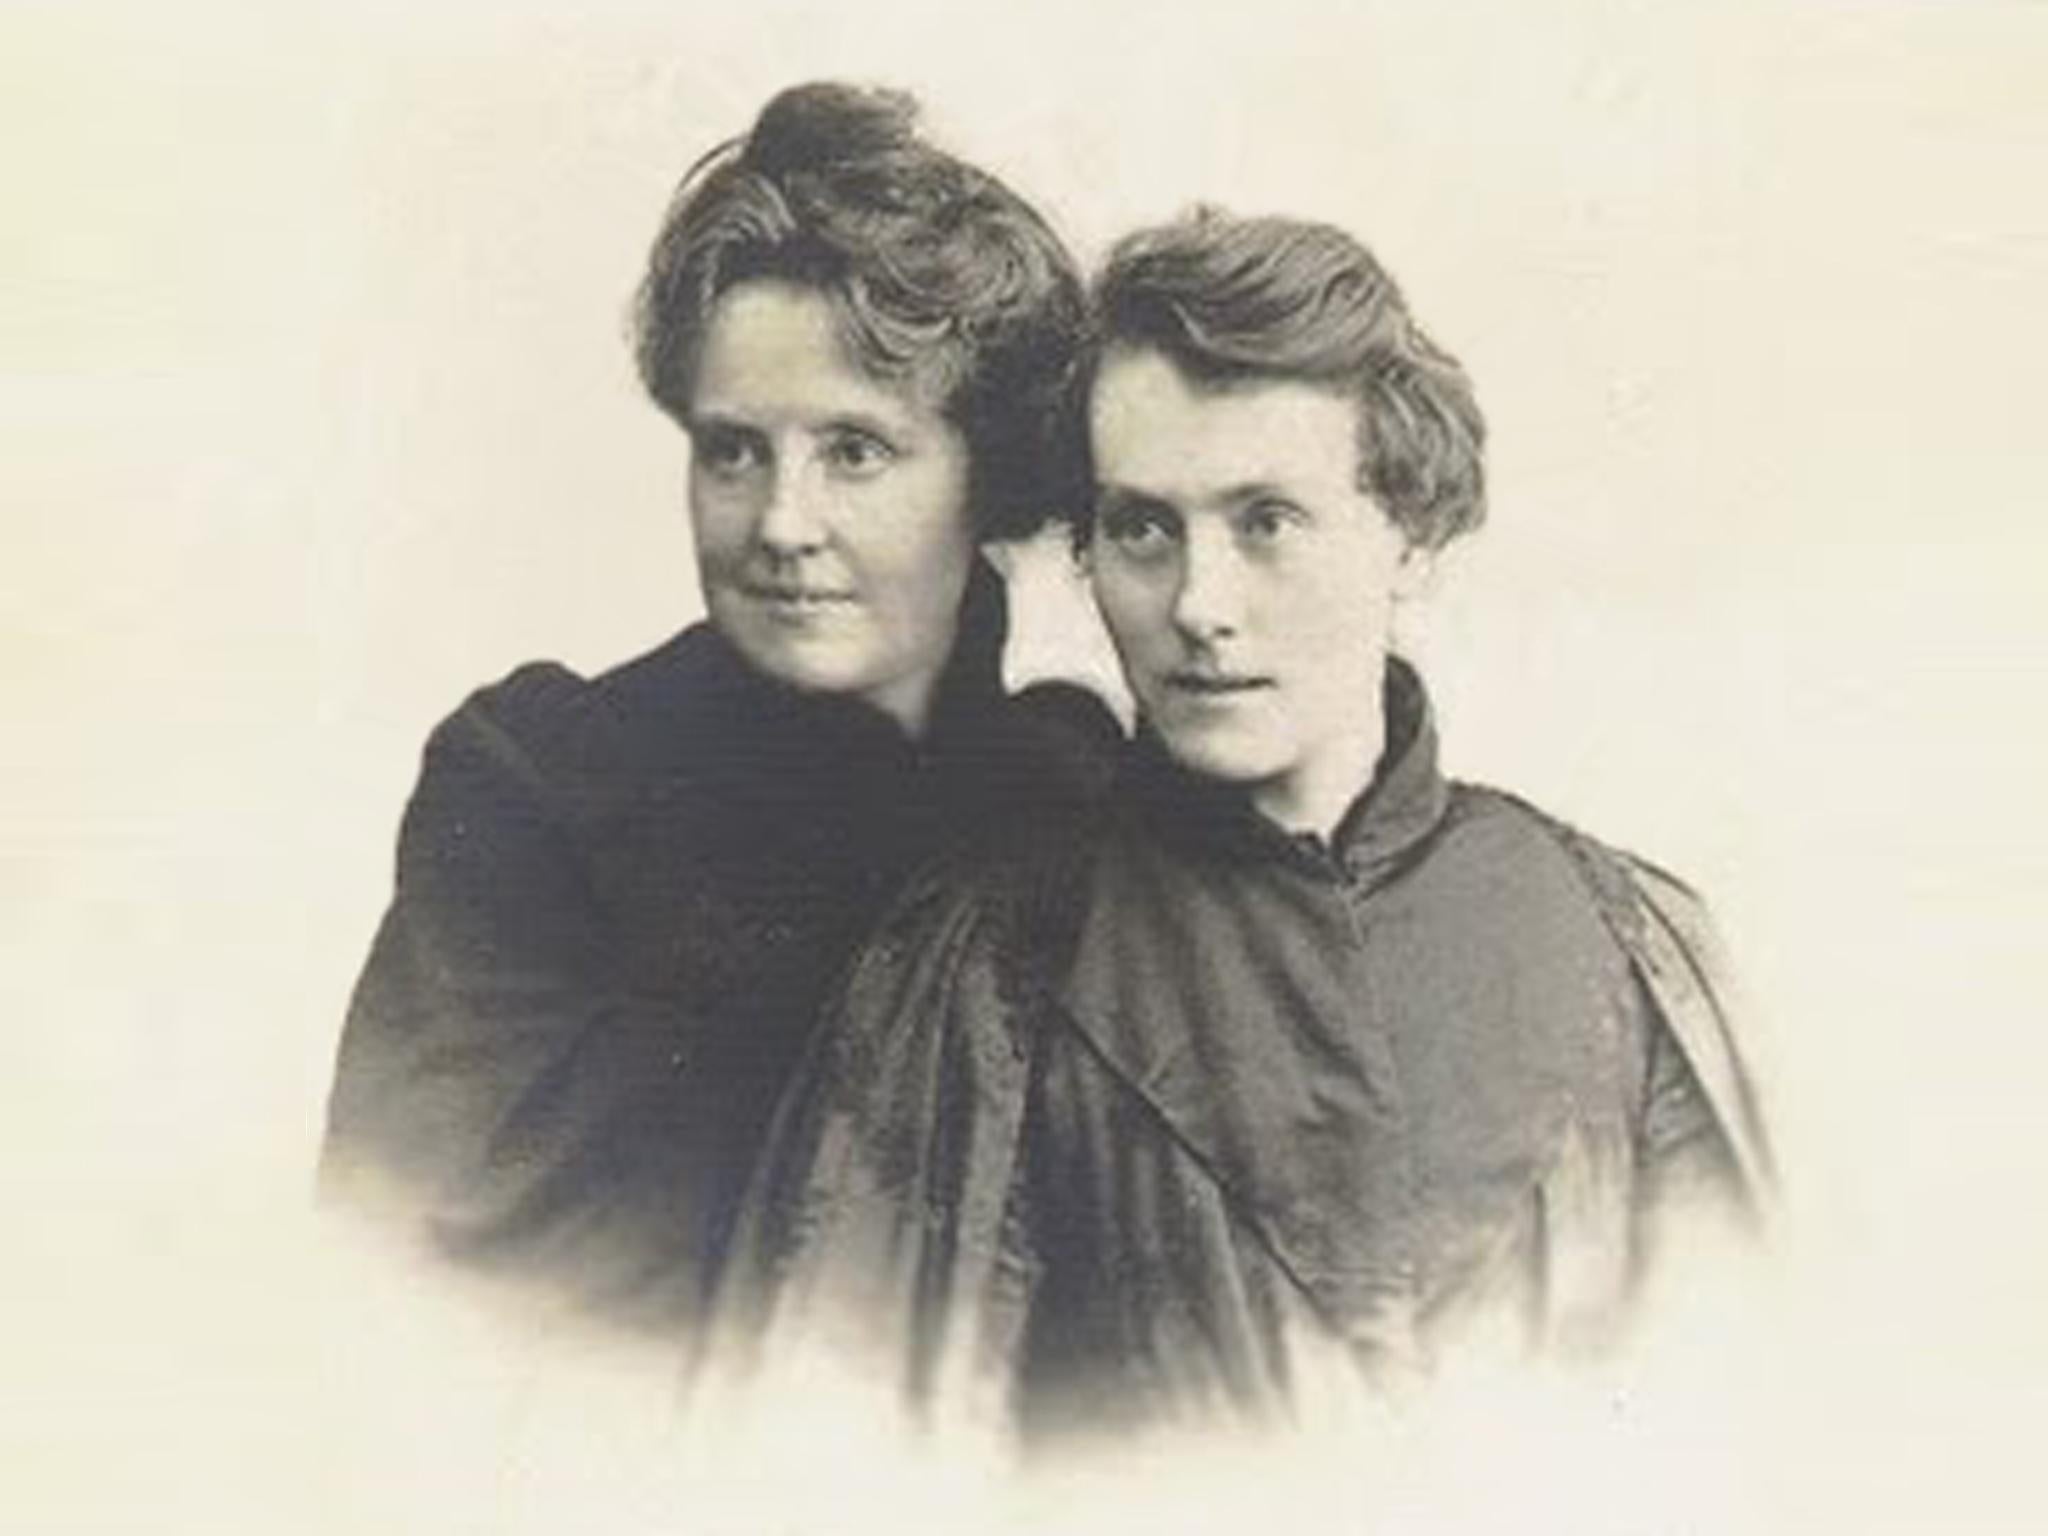 Bradley and Cooper before 1913